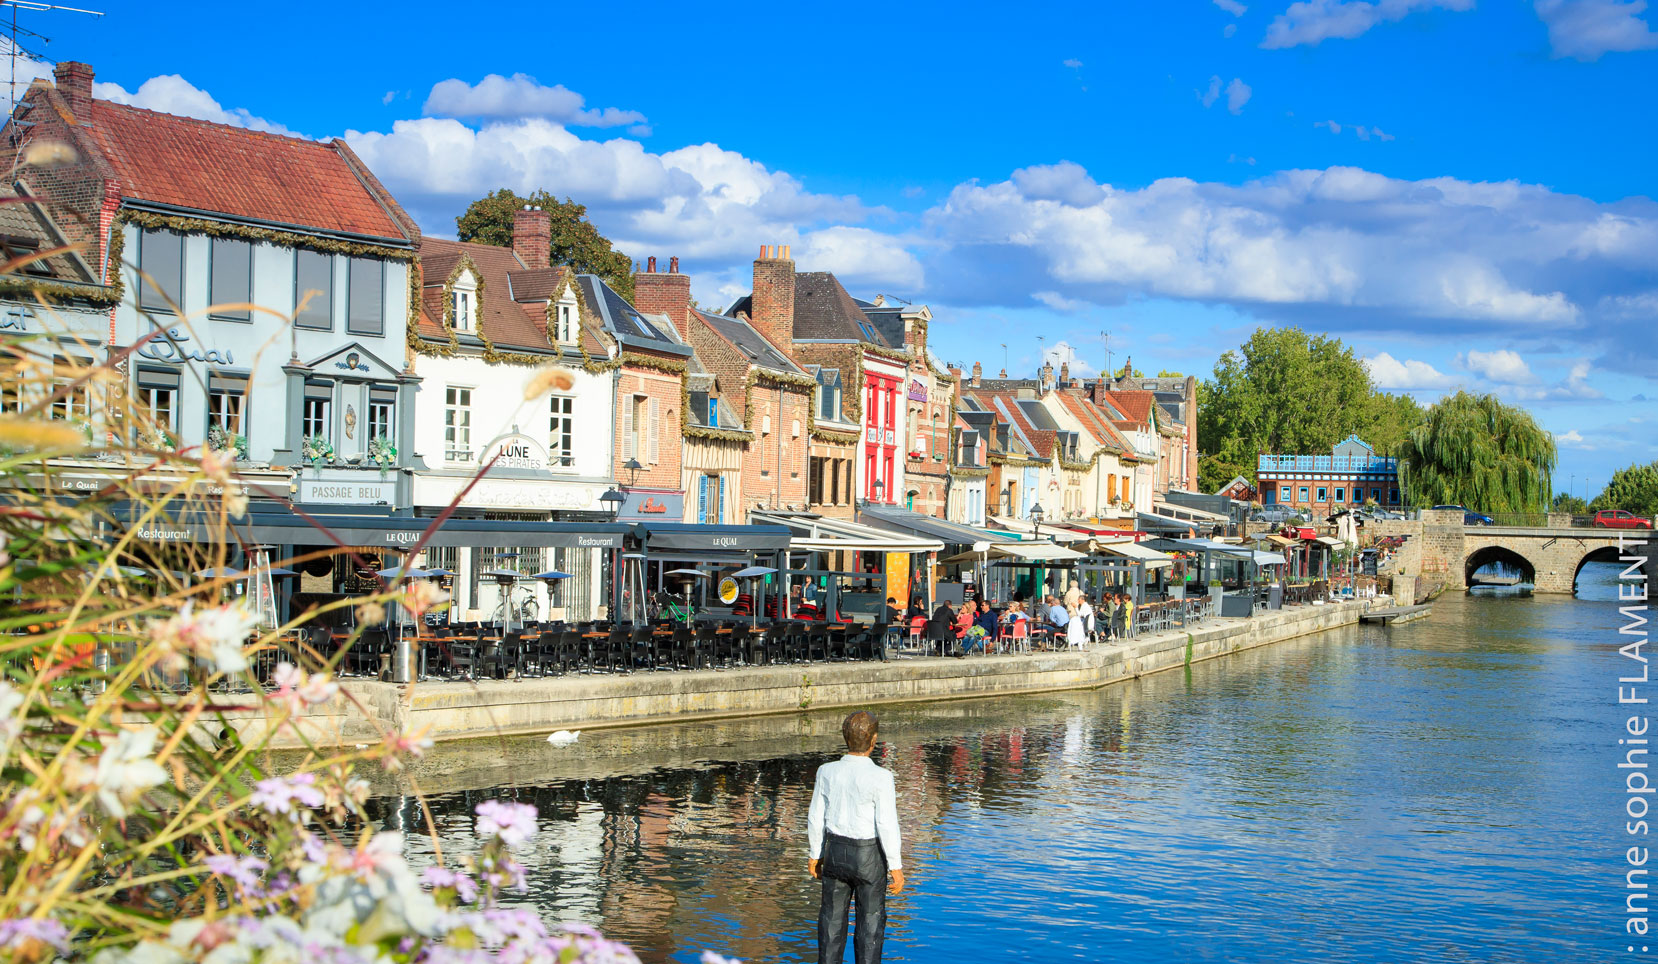 Quai Belu in Amiens. Start here to explore the colourful and characterful St Leu district, like the Venice of the north